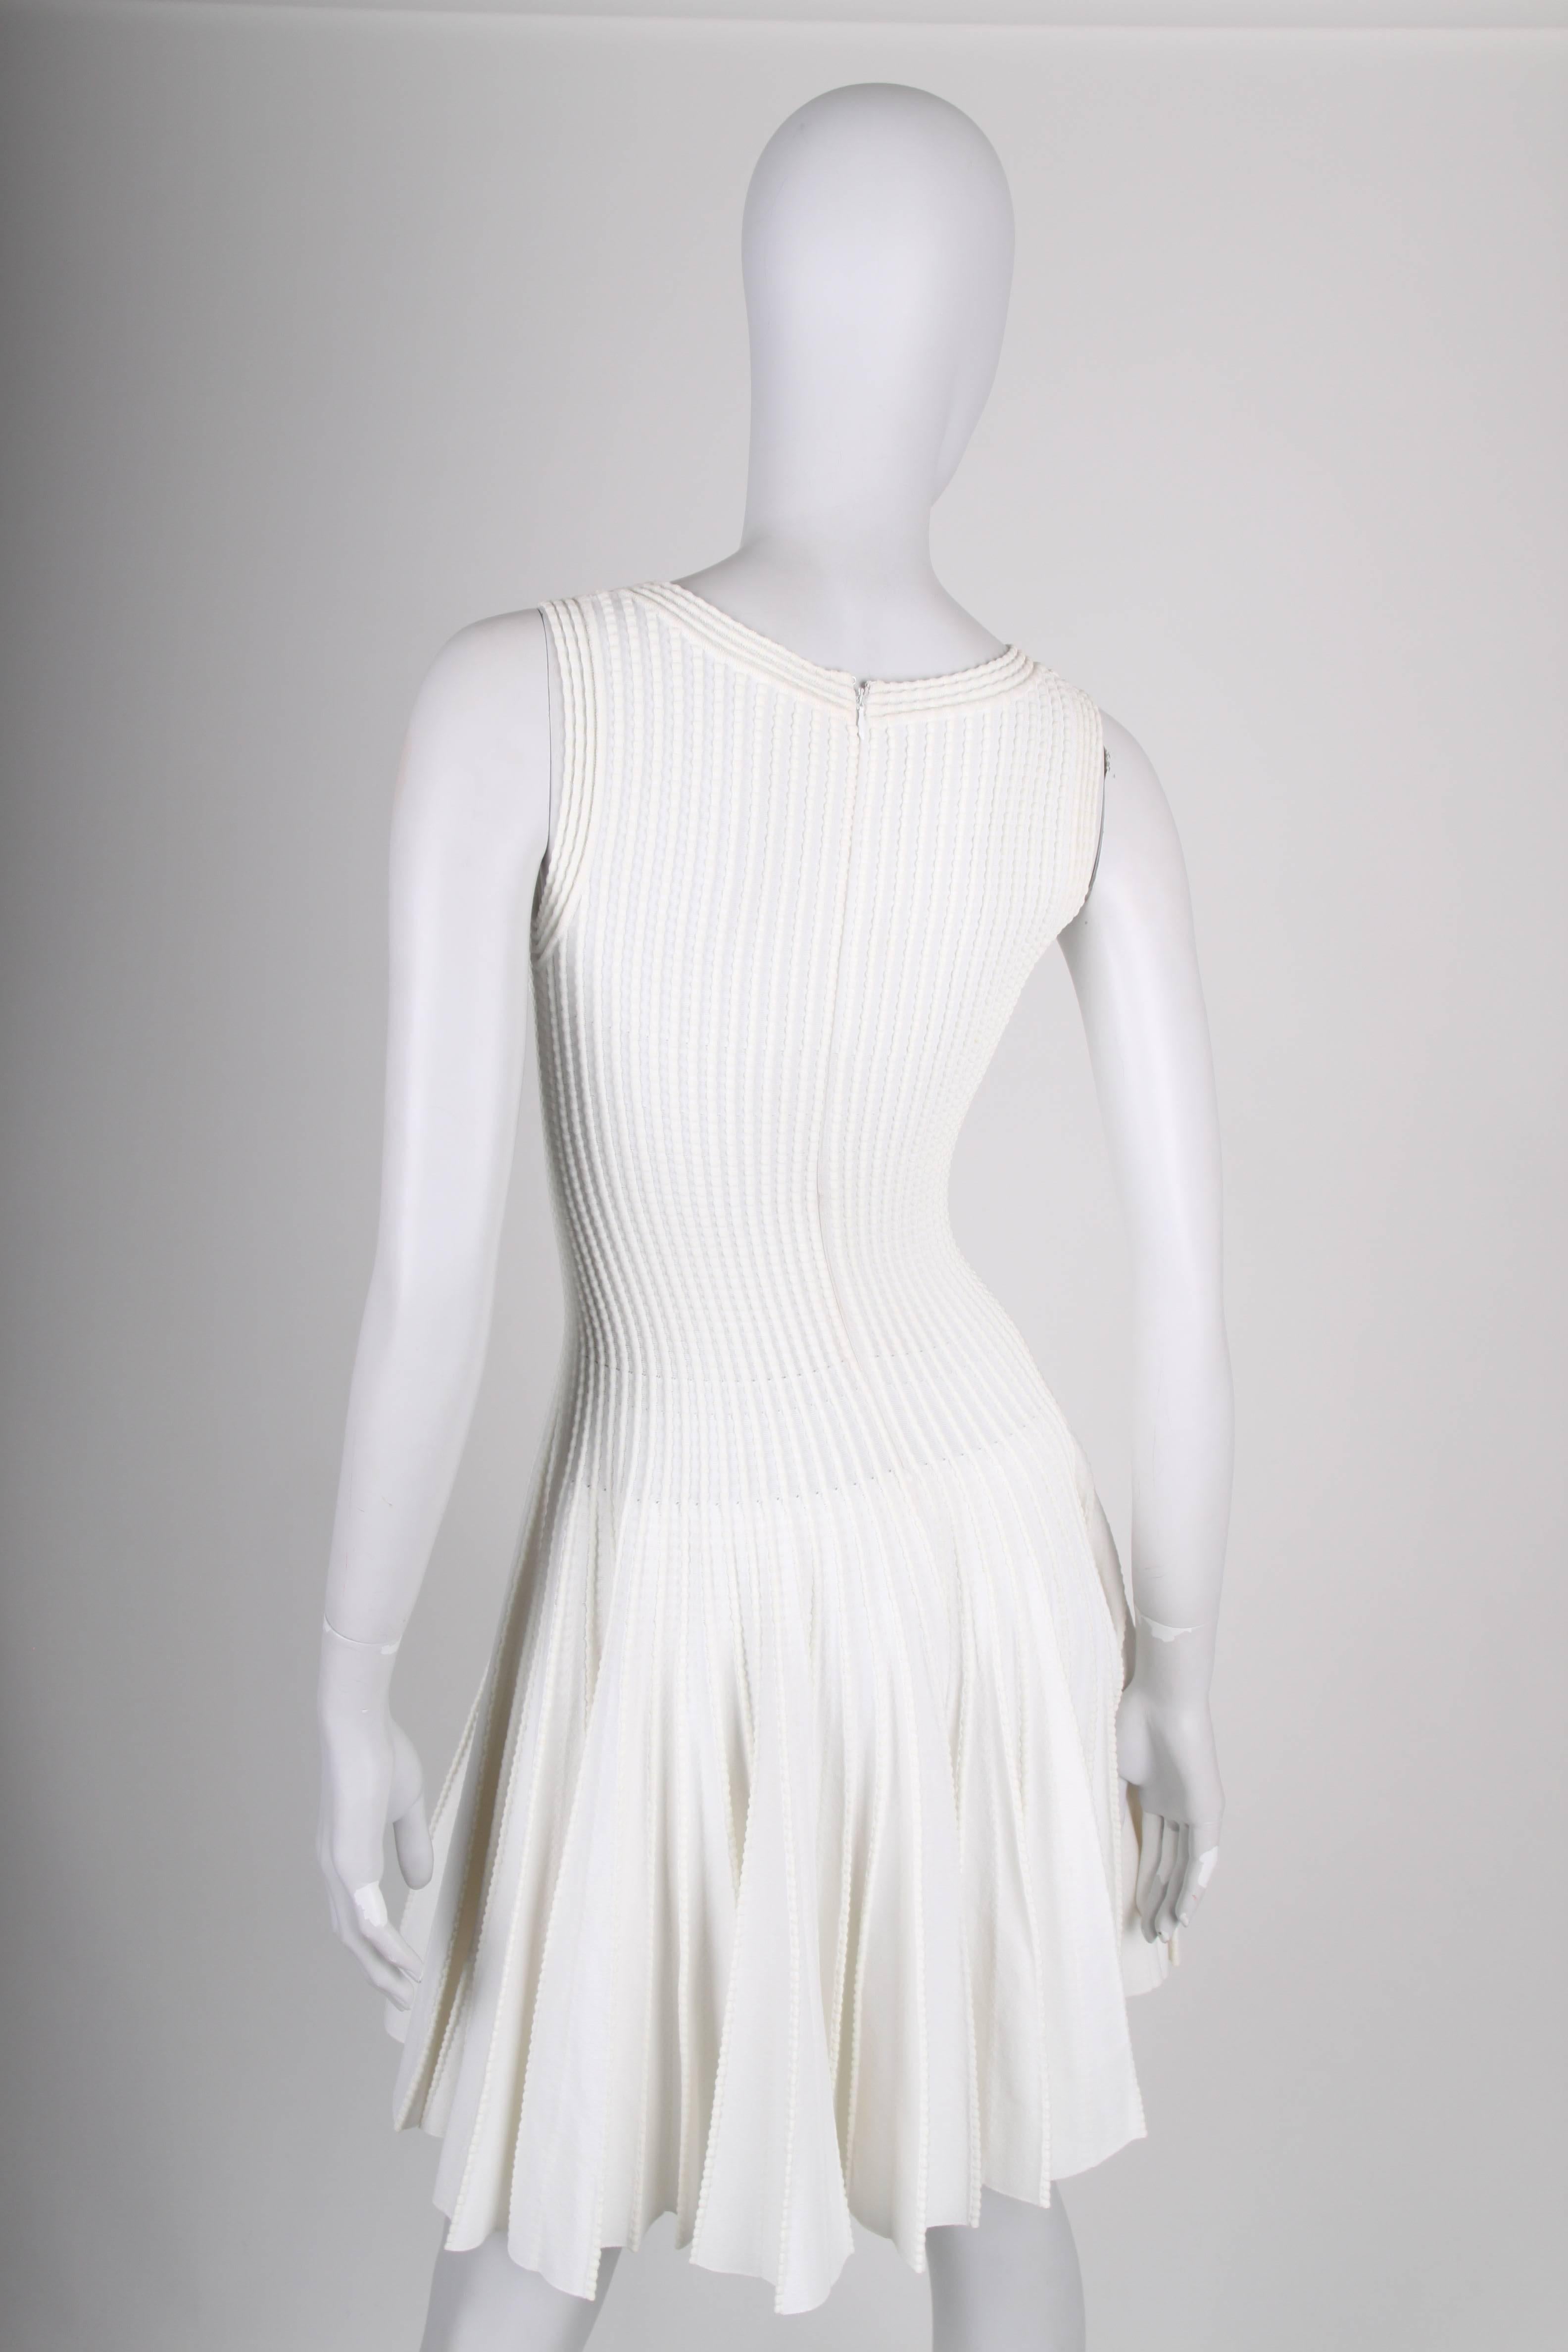 This is a stunning beauty by ALAIA!

Sleeveless dress with a long zipper on the back. Round neckline and a wide pleated skirt. Very comfortable to wear due to the stretching material.

In very good condition, 9/10

Material: 50% viscose, 30% cotton,